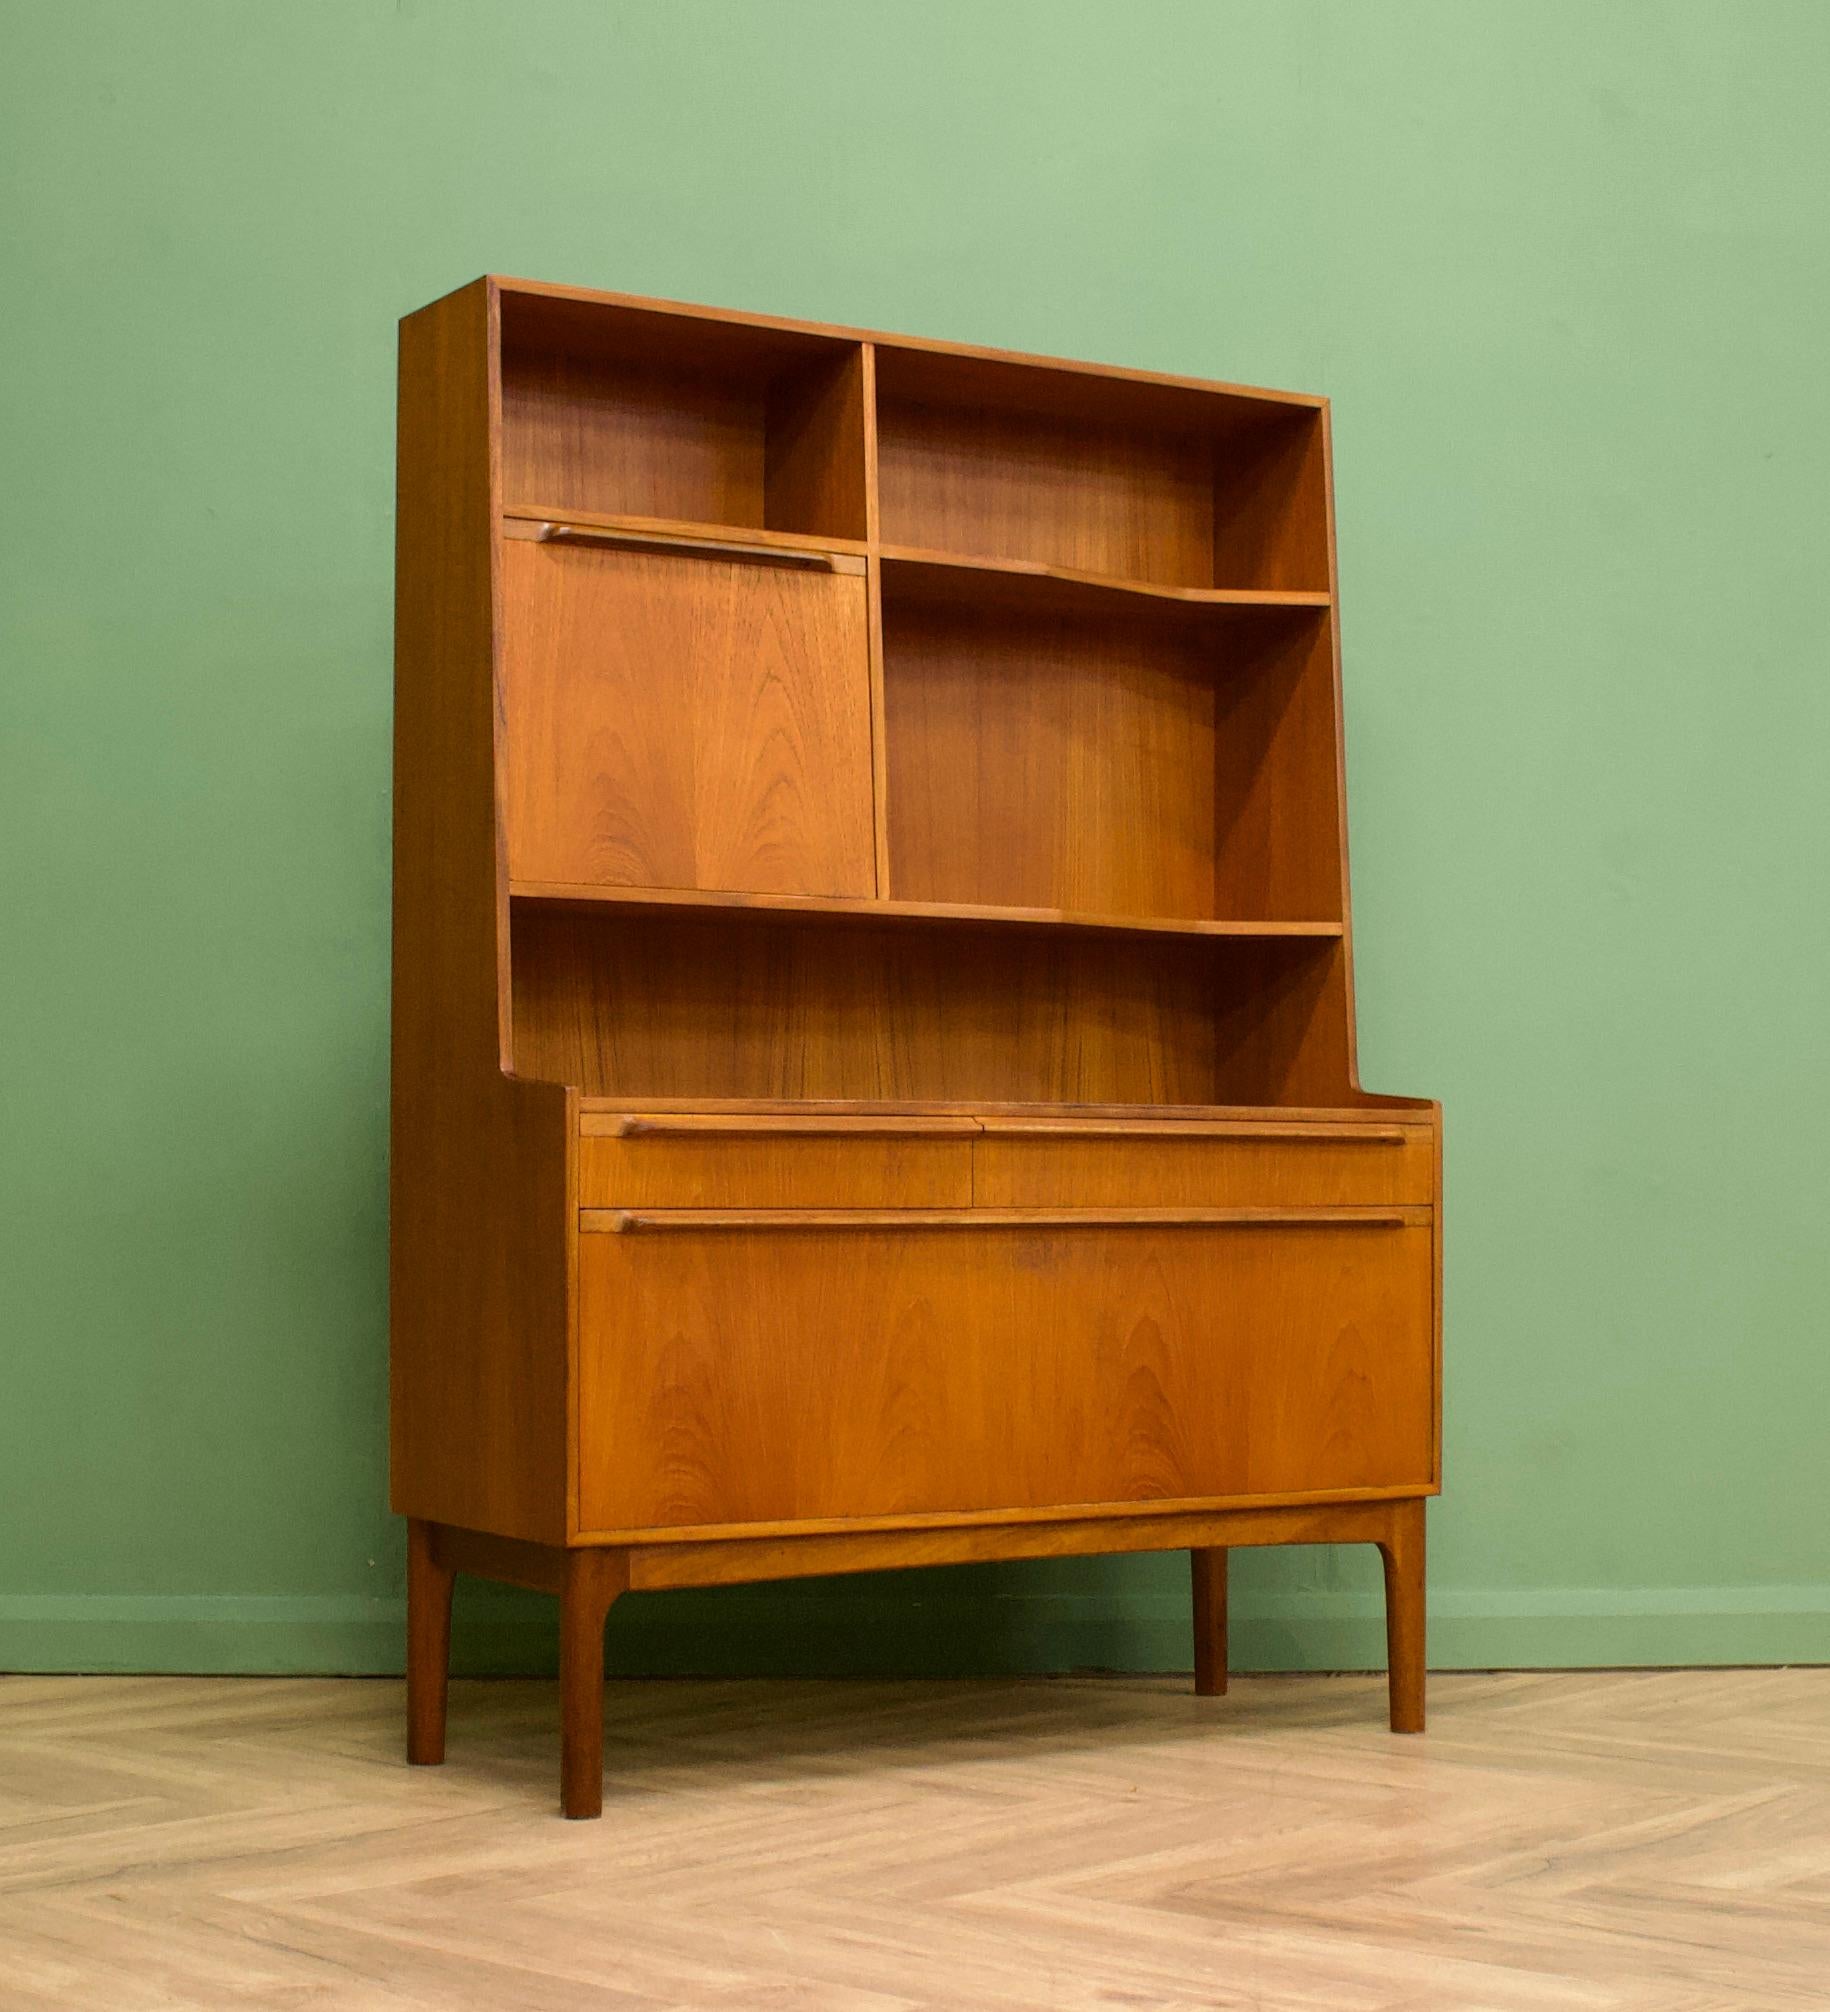 Teak Sideboard or Highboard from McIntosh, 1960s For Sale 3